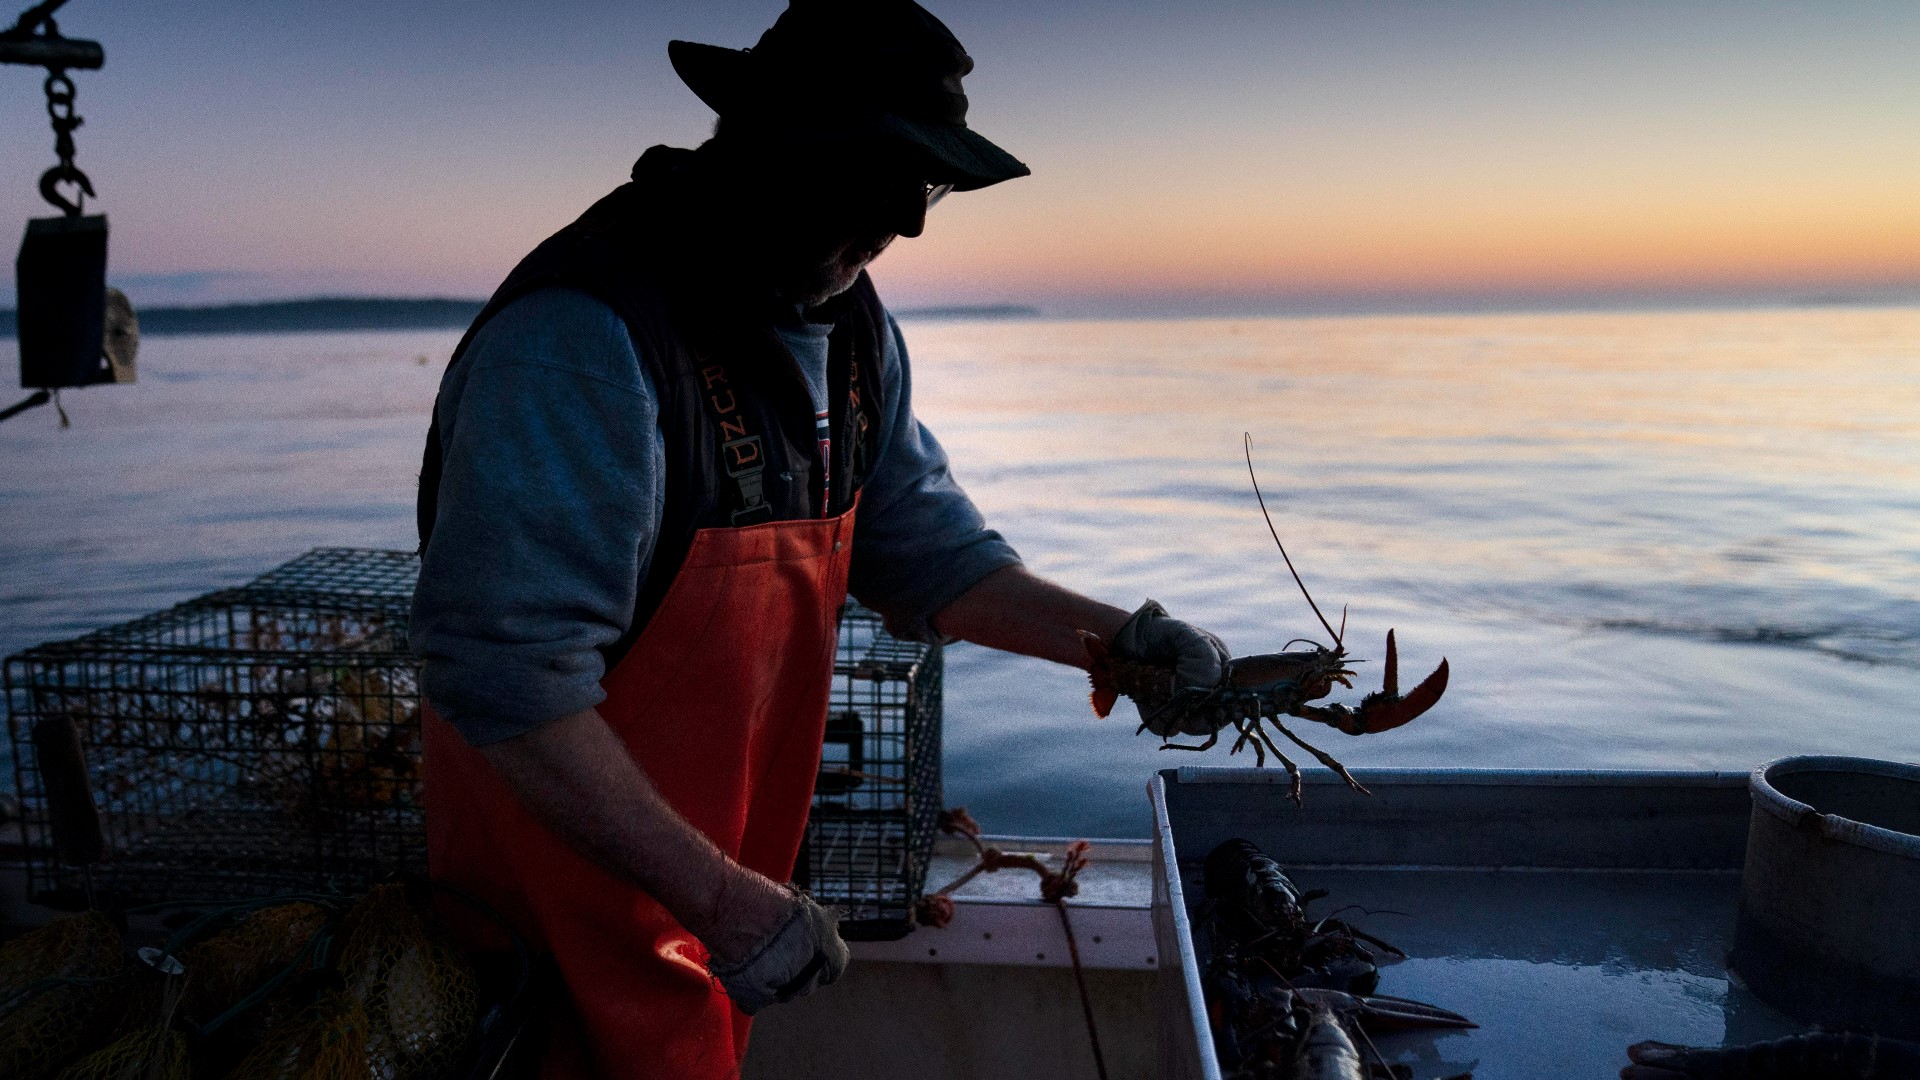 The total of 93.7 million pounds of lobsters caught was the lowest figure since 2009, according to data released Friday by the Maine Department of Marine Resources.